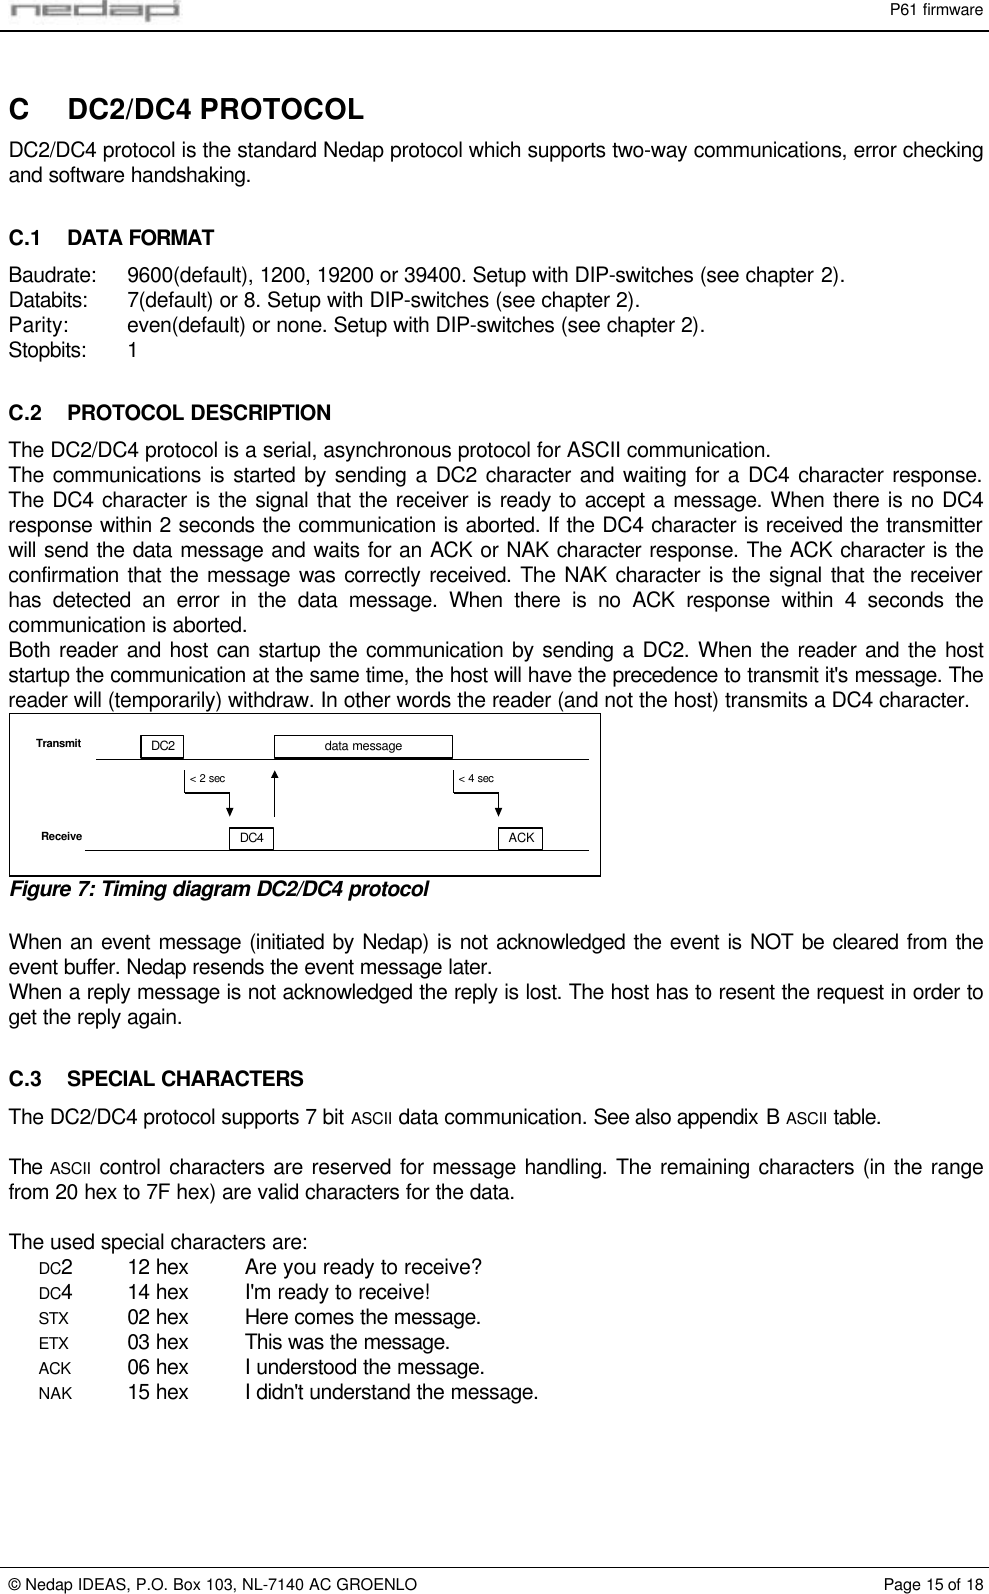 P61 firmware© Nedap IDEAS, P.O. Box 103, NL-7140 AC GROENLO Page 15 of 18C DC2/DC4 PROTOCOLDC2/DC4 protocol is the standard Nedap protocol which supports two-way communications, error checkingand software handshaking.C.1 DATA FORMATBaudrate: 9600(default), 1200, 19200 or 39400. Setup with DIP-switches (see chapter 2).Databits: 7(default) or 8. Setup with DIP-switches (see chapter 2).Parity: even(default) or none. Setup with DIP-switches (see chapter 2).Stopbits: 1C.2 PROTOCOL DESCRIPTIONThe DC2/DC4 protocol is a serial, asynchronous protocol for ASCII communication.The communications is started by sending a DC2 character and waiting for a DC4 character response.The DC4 character is the signal that the receiver is ready to accept a message. When there is no DC4response within 2 seconds the communication is aborted. If the DC4 character is received the transmitterwill send the data message and waits for an ACK or NAK character response. The ACK character is theconfirmation that the message was correctly received. The NAK character is the signal that the receiverhas detected an error in the data message. When there is no ACK response within 4 seconds thecommunication is aborted.Both reader and host can startup the communication by sending a DC2. When the reader and the hoststartup the communication at the same time, the host will have the precedence to transmit it&apos;s message. Thereader will (temporarily) withdraw. In other words the reader (and not the host) transmits a DC4 character.DC2DC4data messageACK&lt; 2 sec &lt; 4 secTransmitReceiveFigure 7: Timing diagram DC2/DC4 protocolWhen an event message (initiated by Nedap) is not acknowledged the event is NOT be cleared from theevent buffer. Nedap resends the event message later.When a reply message is not acknowledged the reply is lost. The host has to resent the request in order toget the reply again.C.3 SPECIAL CHARACTERSThe DC2/DC4 protocol supports 7 bit ASCII data communication. See also appendix B ASCII table.The ASCII control characters are reserved for message handling. The remaining characters (in the rangefrom 20 hex to 7F hex) are valid characters for the data.The used special characters are:DC212 hex Are you ready to receive?DC414 hex I&apos;m ready to receive!STX 02 hex Here comes the message.ETX 03 hex This was the message.ACK 06 hex I understood the message.NAK 15 hex I didn&apos;t understand the message.